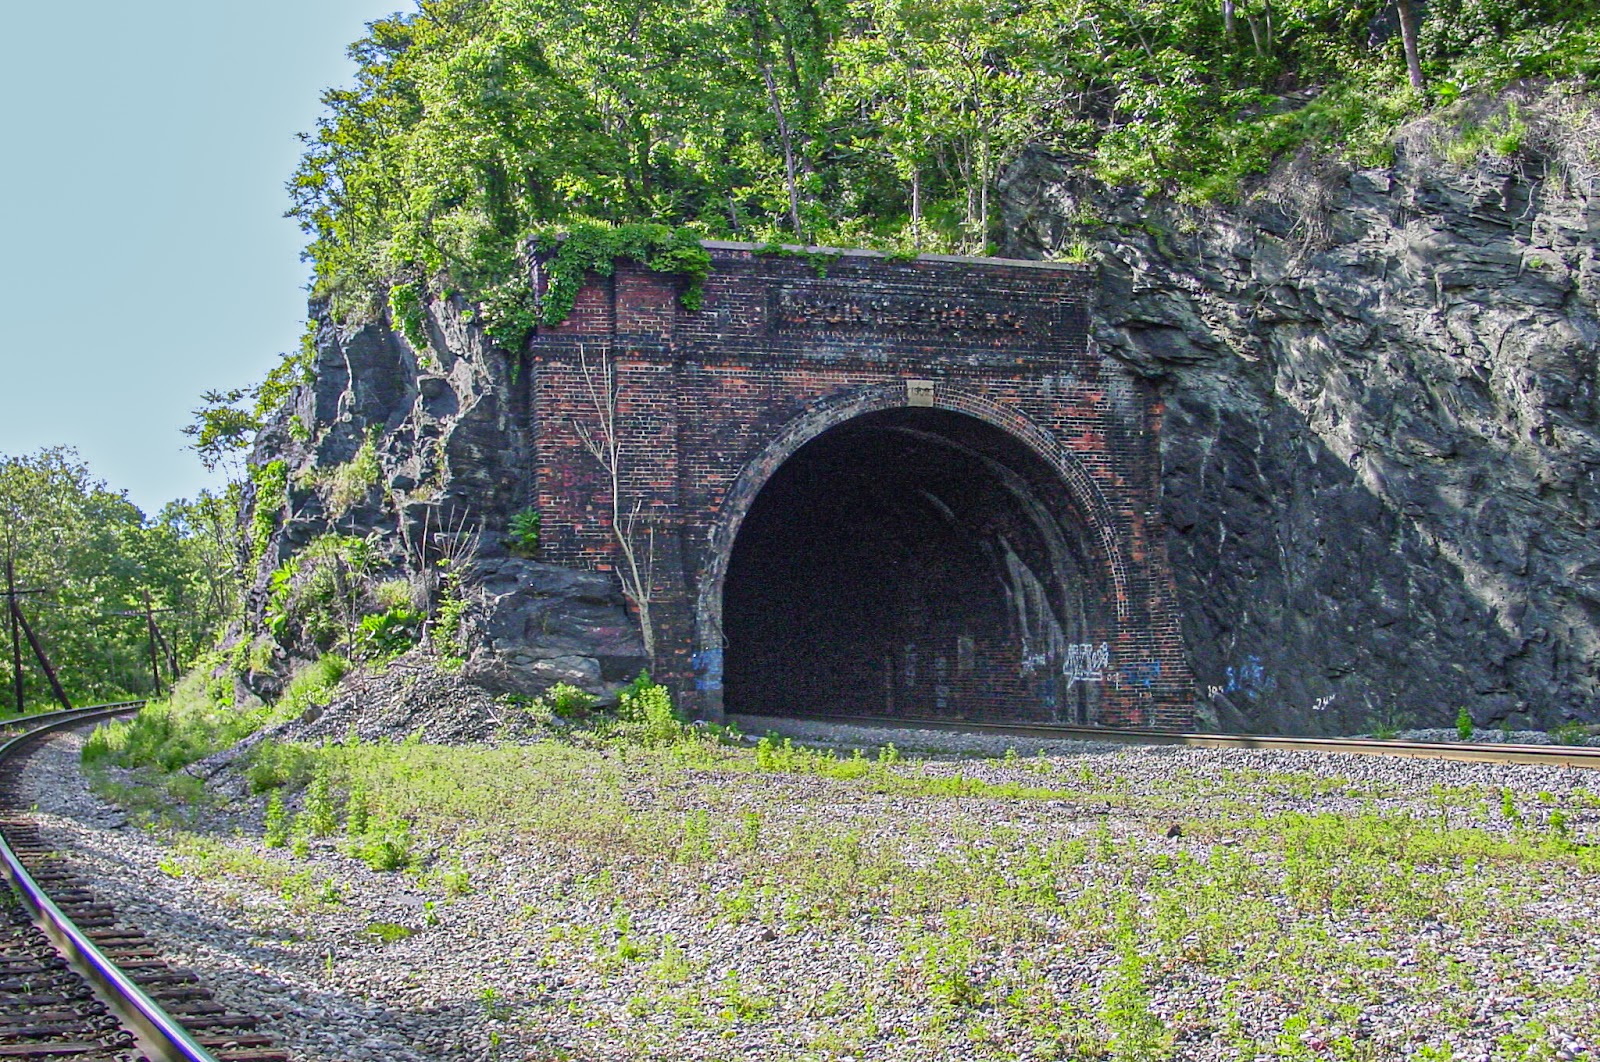 A rail road tunnel with a track into the tunnel and a track running to the side